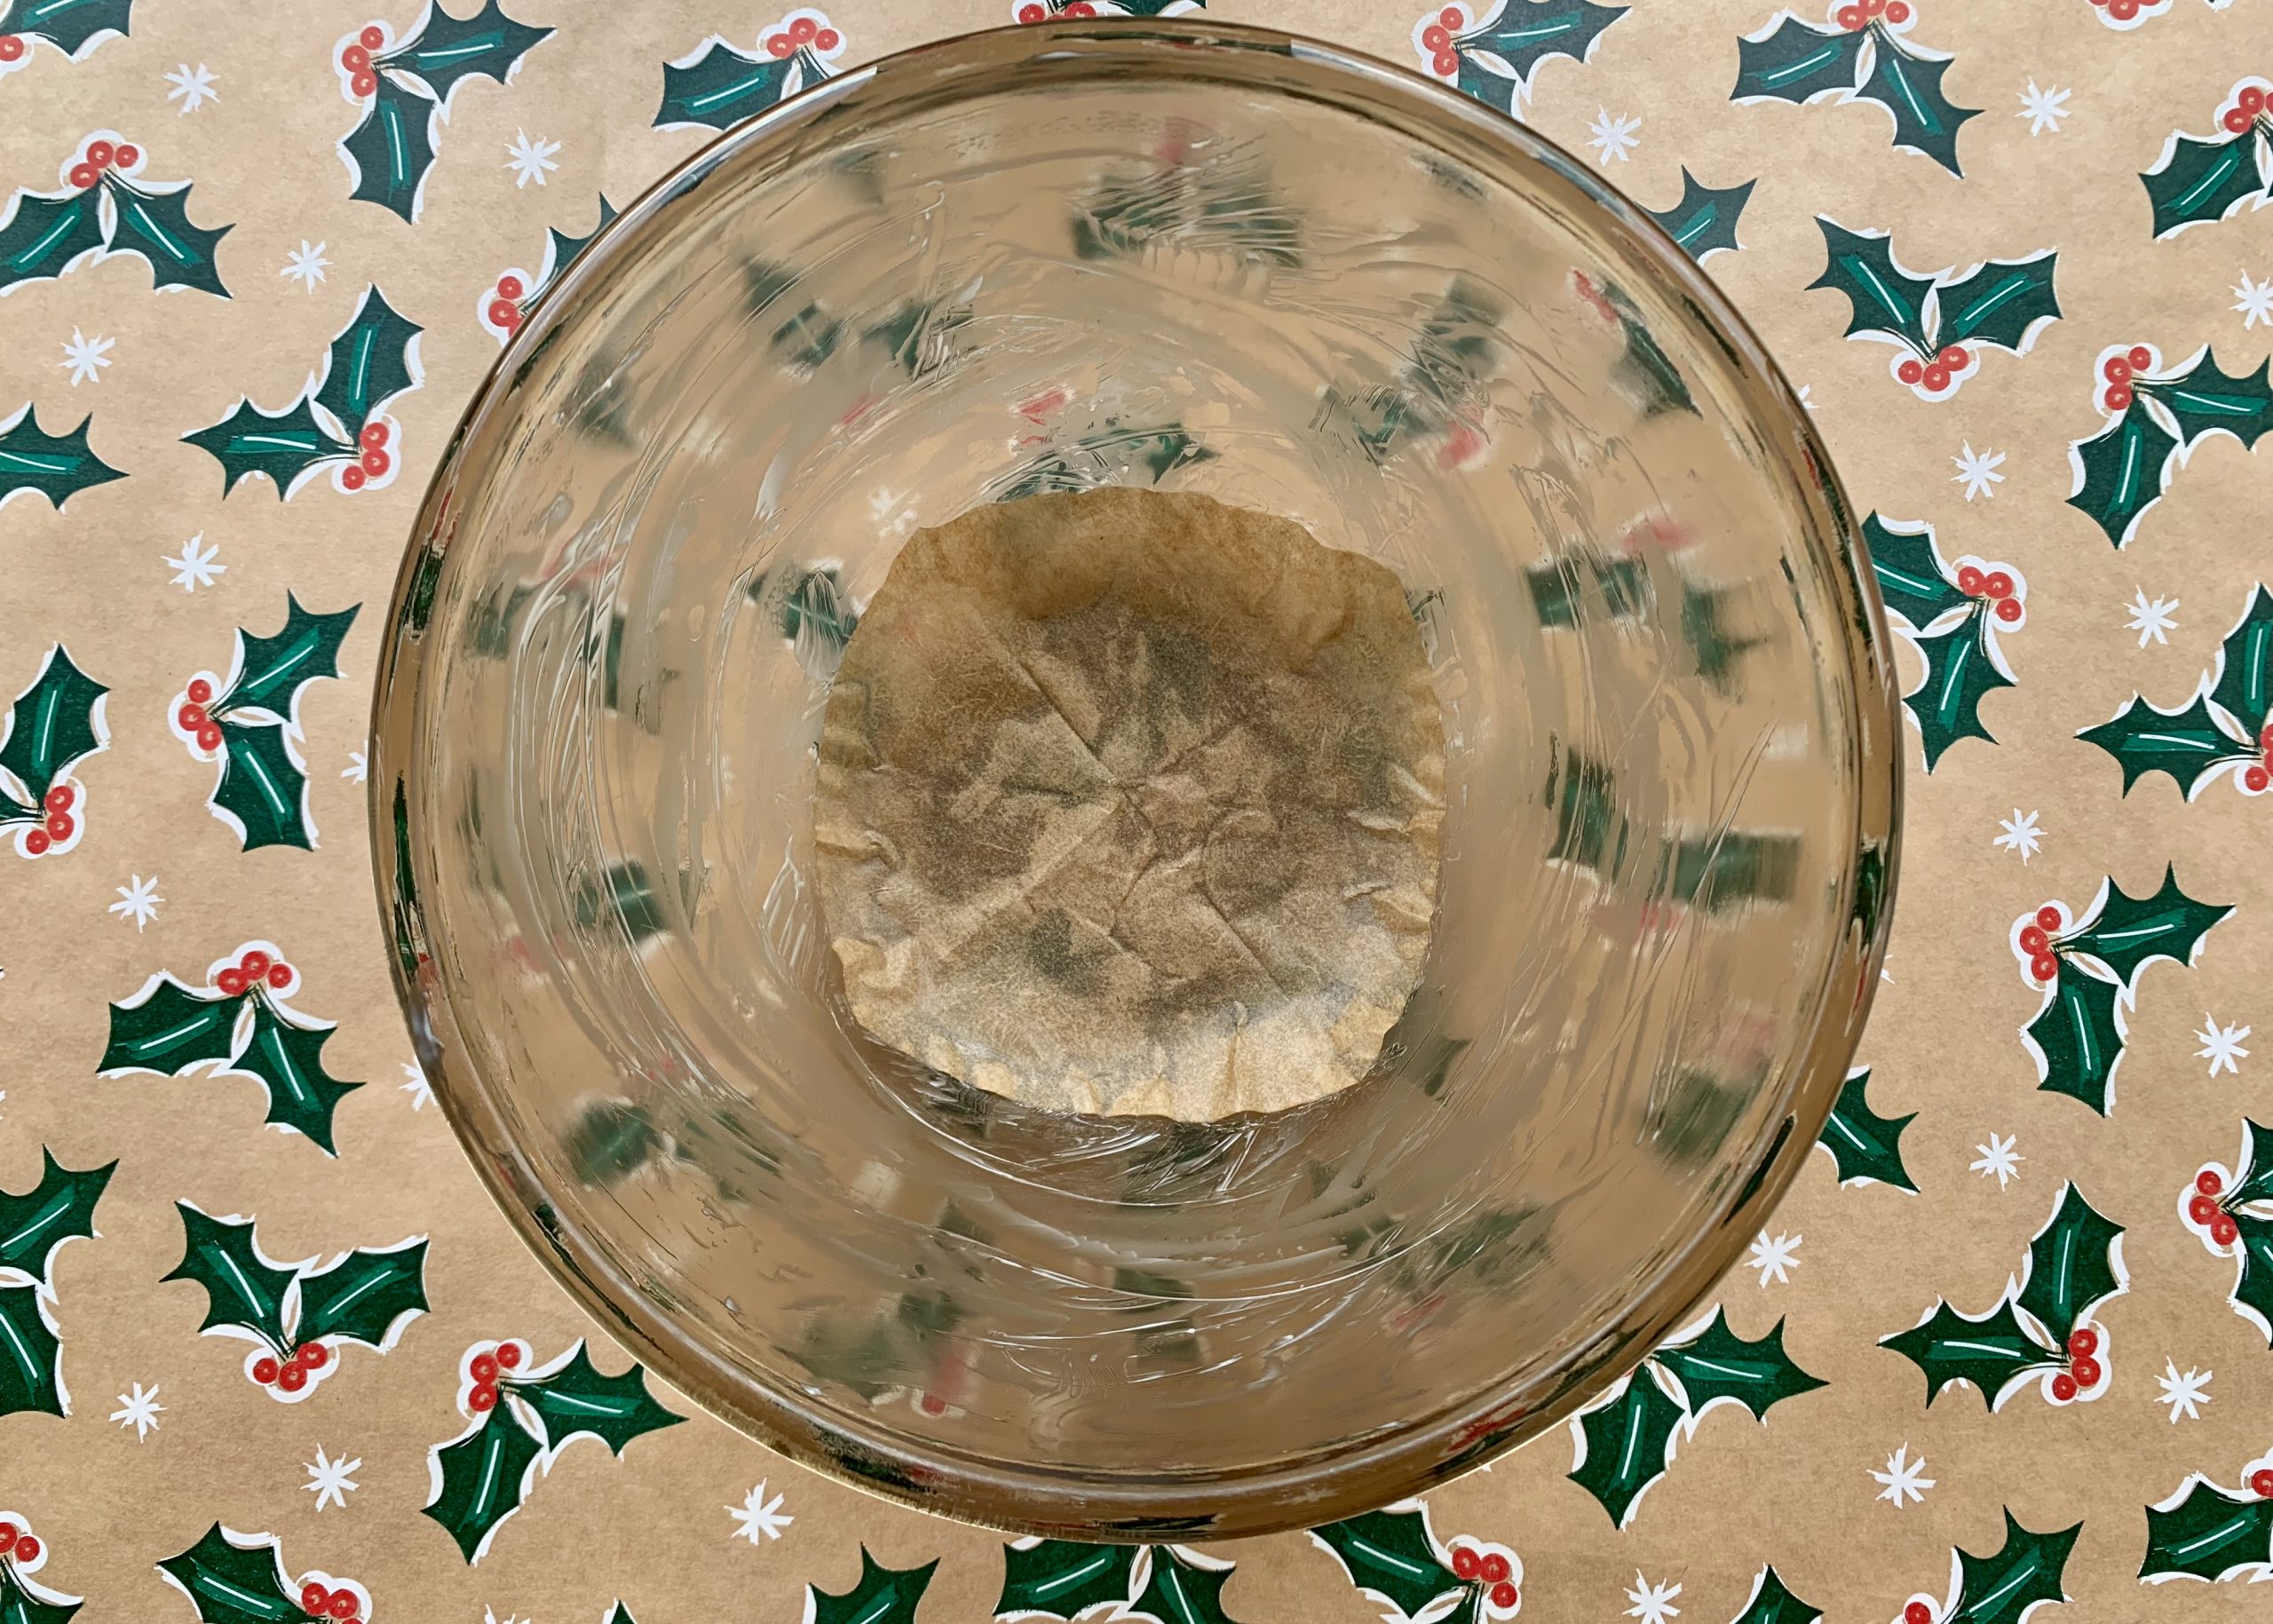 Buttered pyrex dish with a disk of greaseproof paper on the bottom